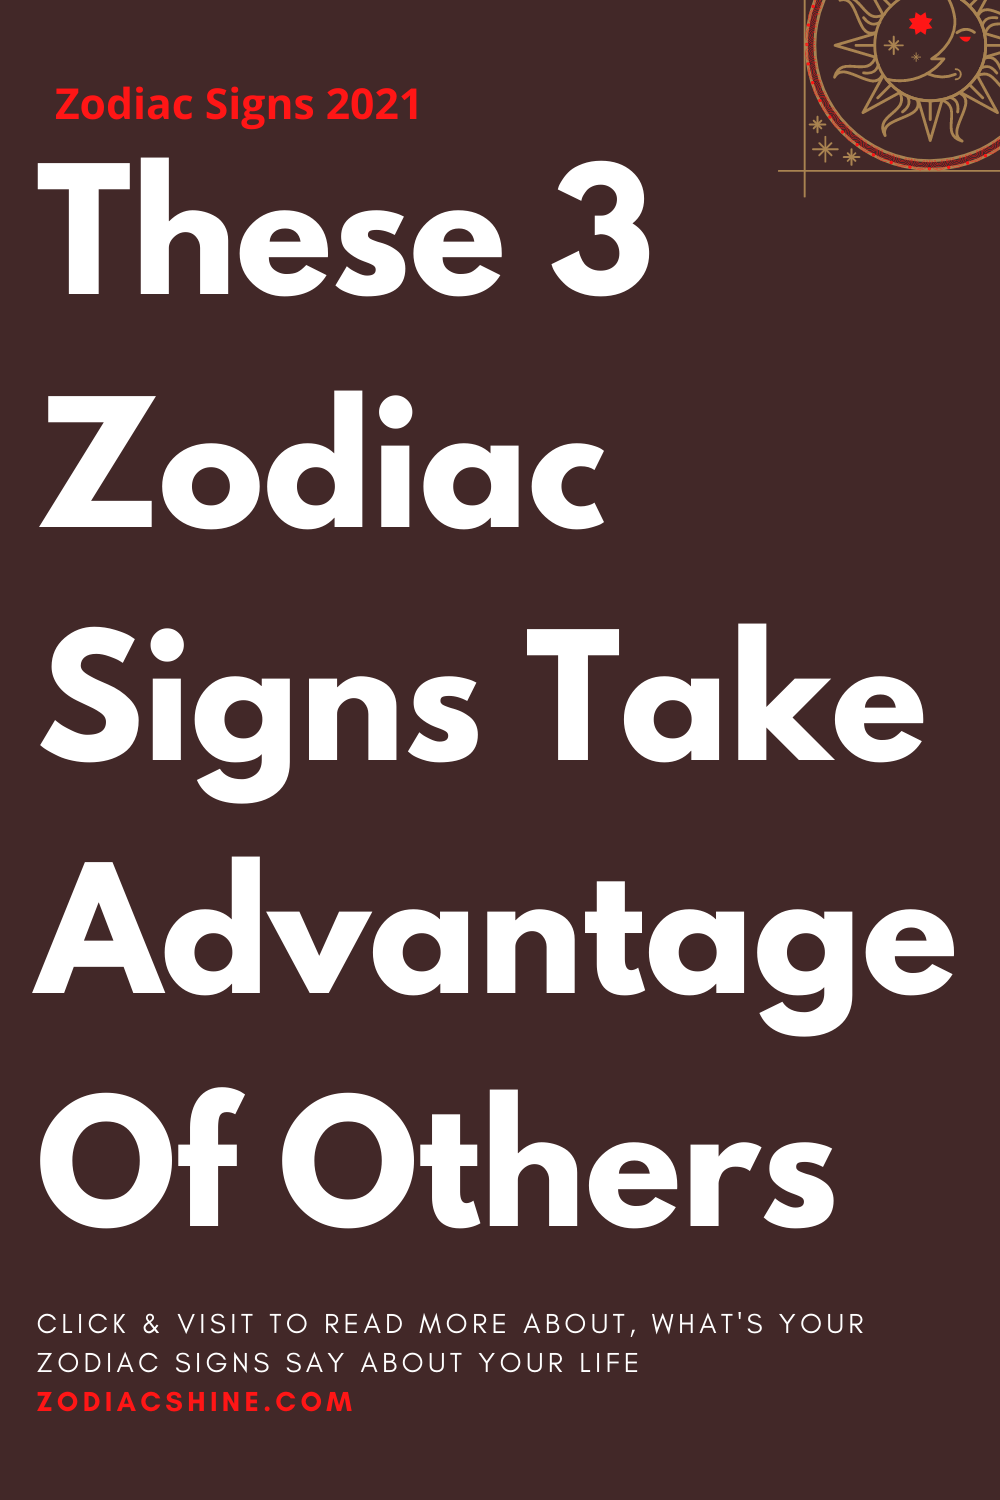 These 3 Zodiac Signs Take Advantage Of Others